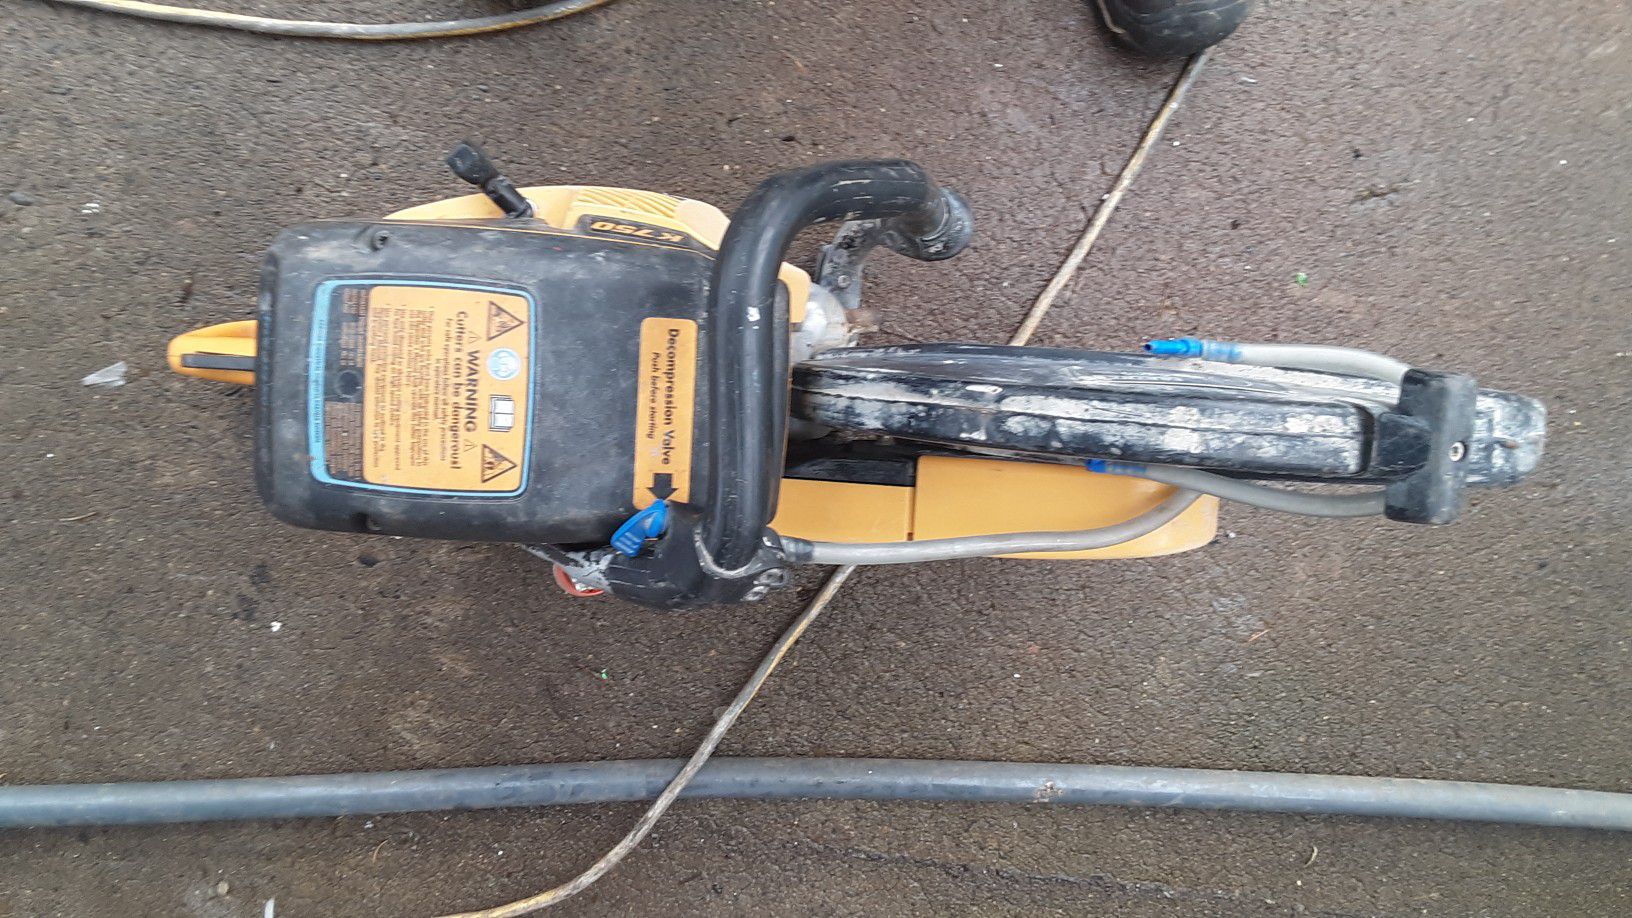 Partner husqvarna k750 14in concrete saw, metal cutting etc. Low hours Runs very well reliable